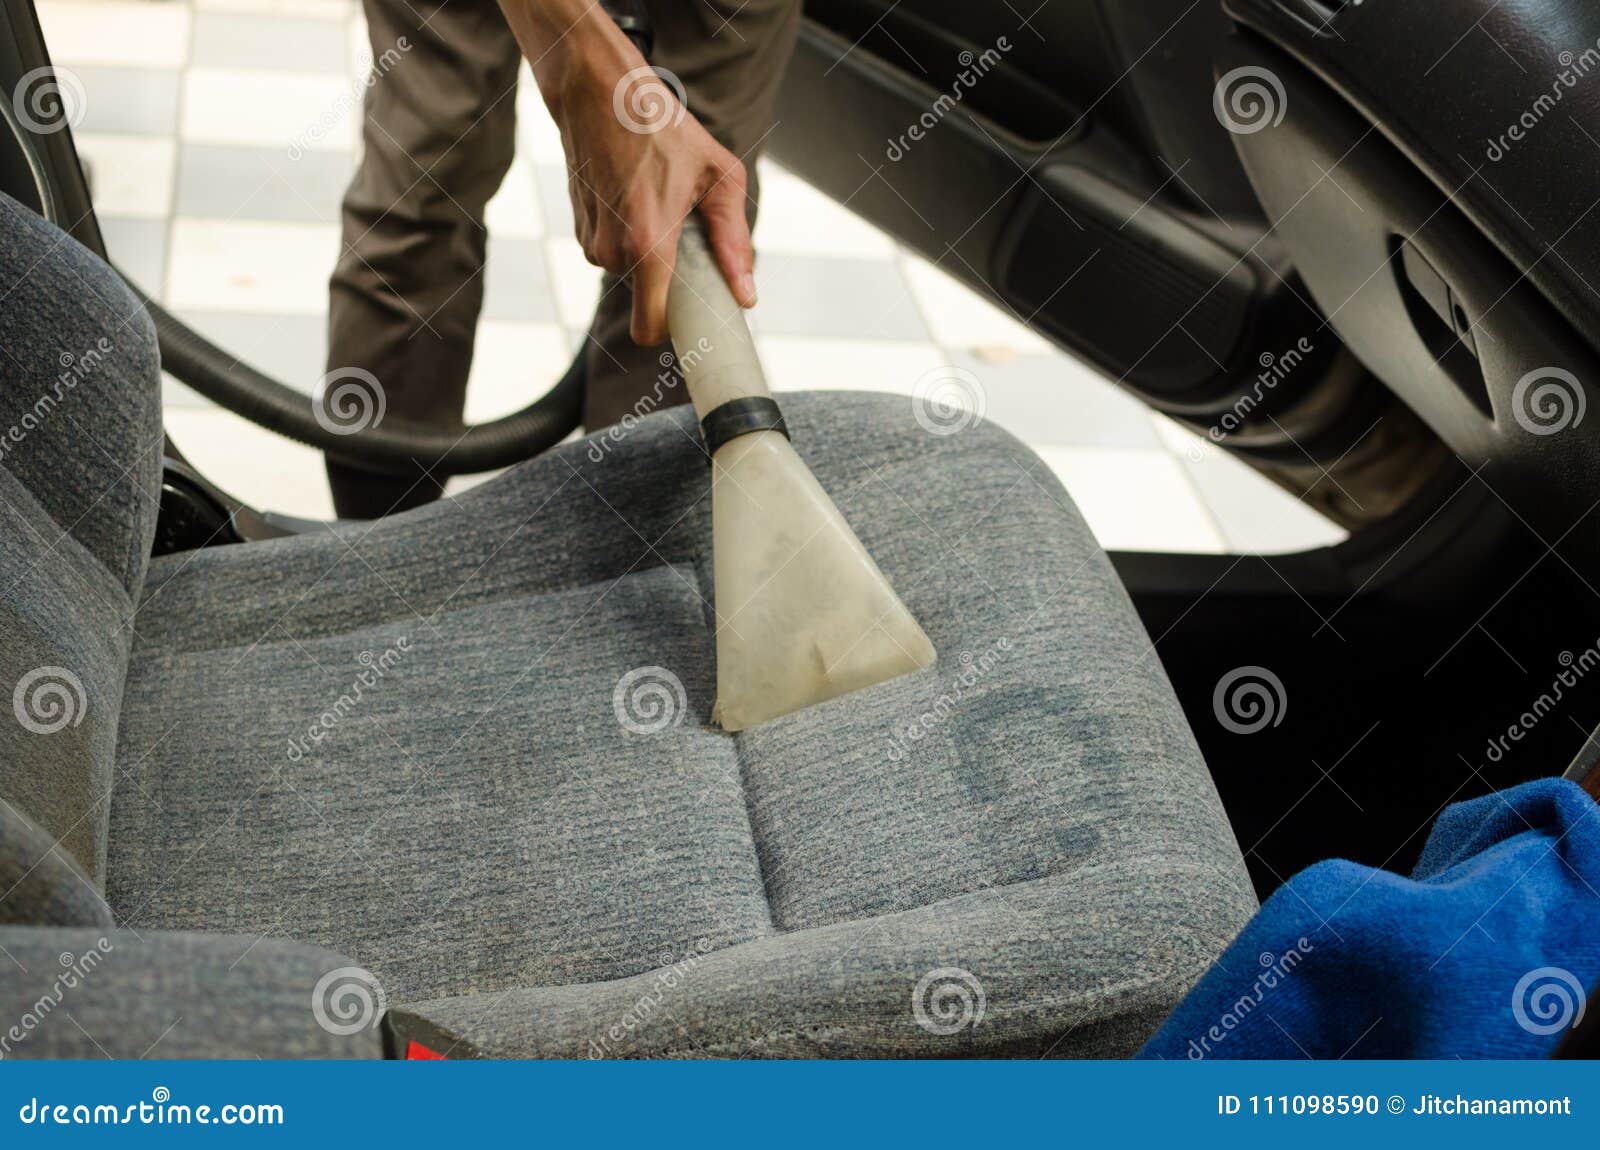 Cleaning Of Car Seat With Wet Vacuum Cleaner Stock Photo